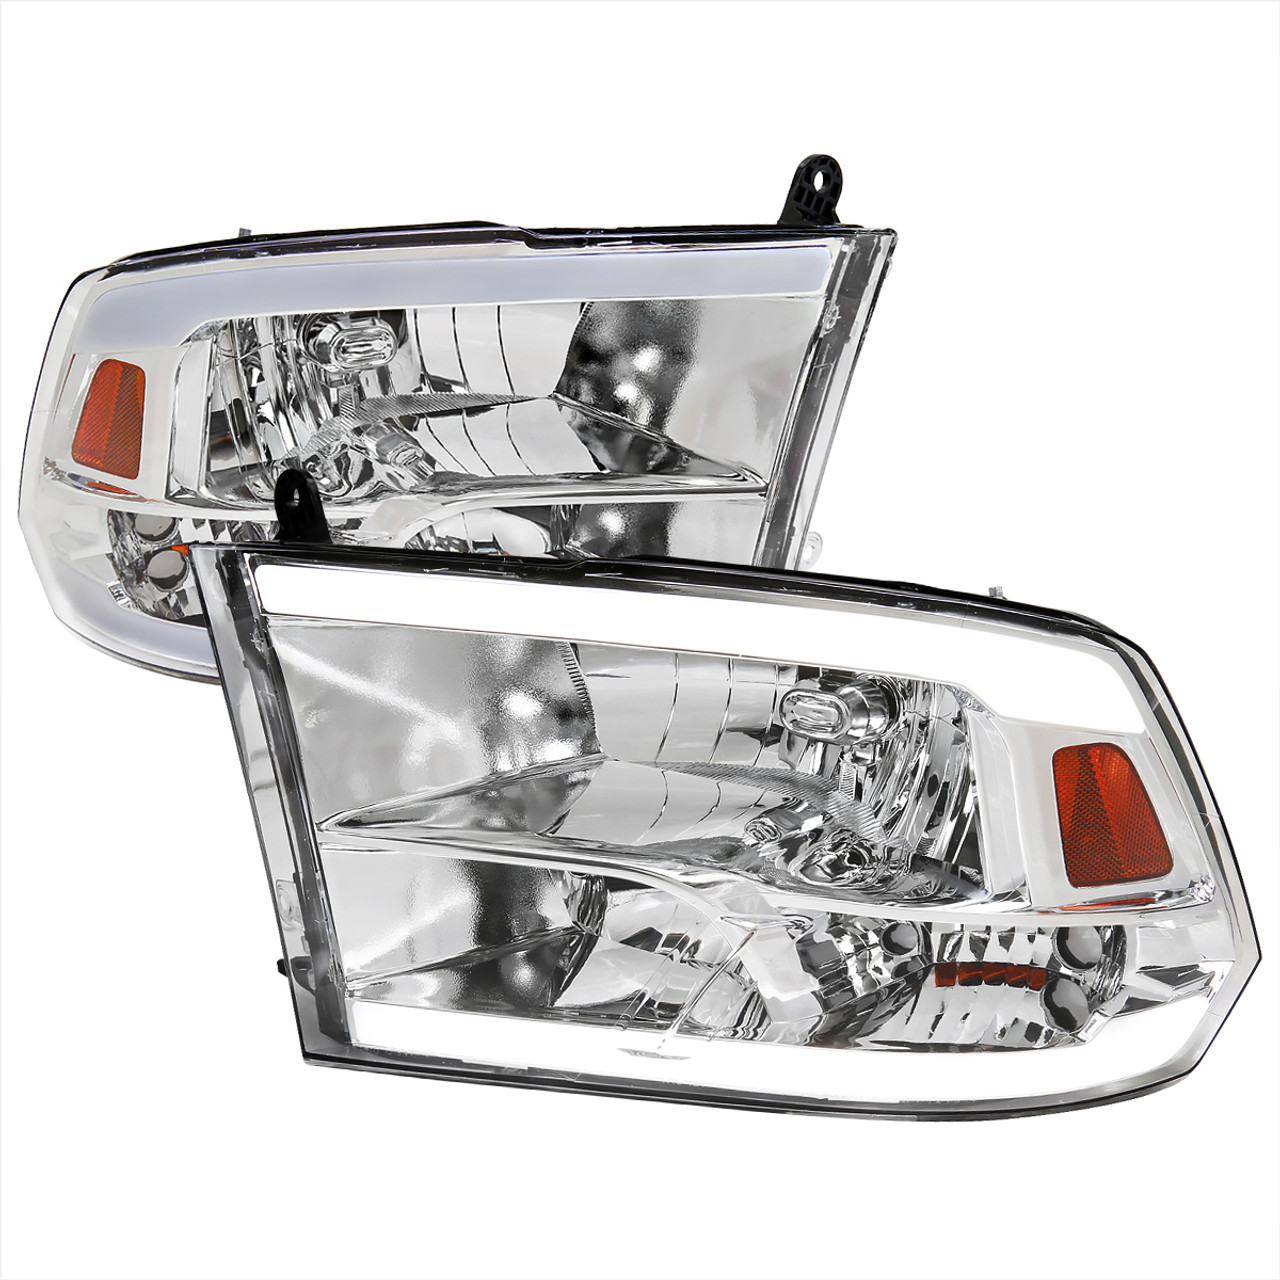 2009-2019 Dodge Ram 1500 2500 3500 Quad Style Headlights with LED Tube  (Chrome Housing/Clear Lens) - Spec-D Tuning